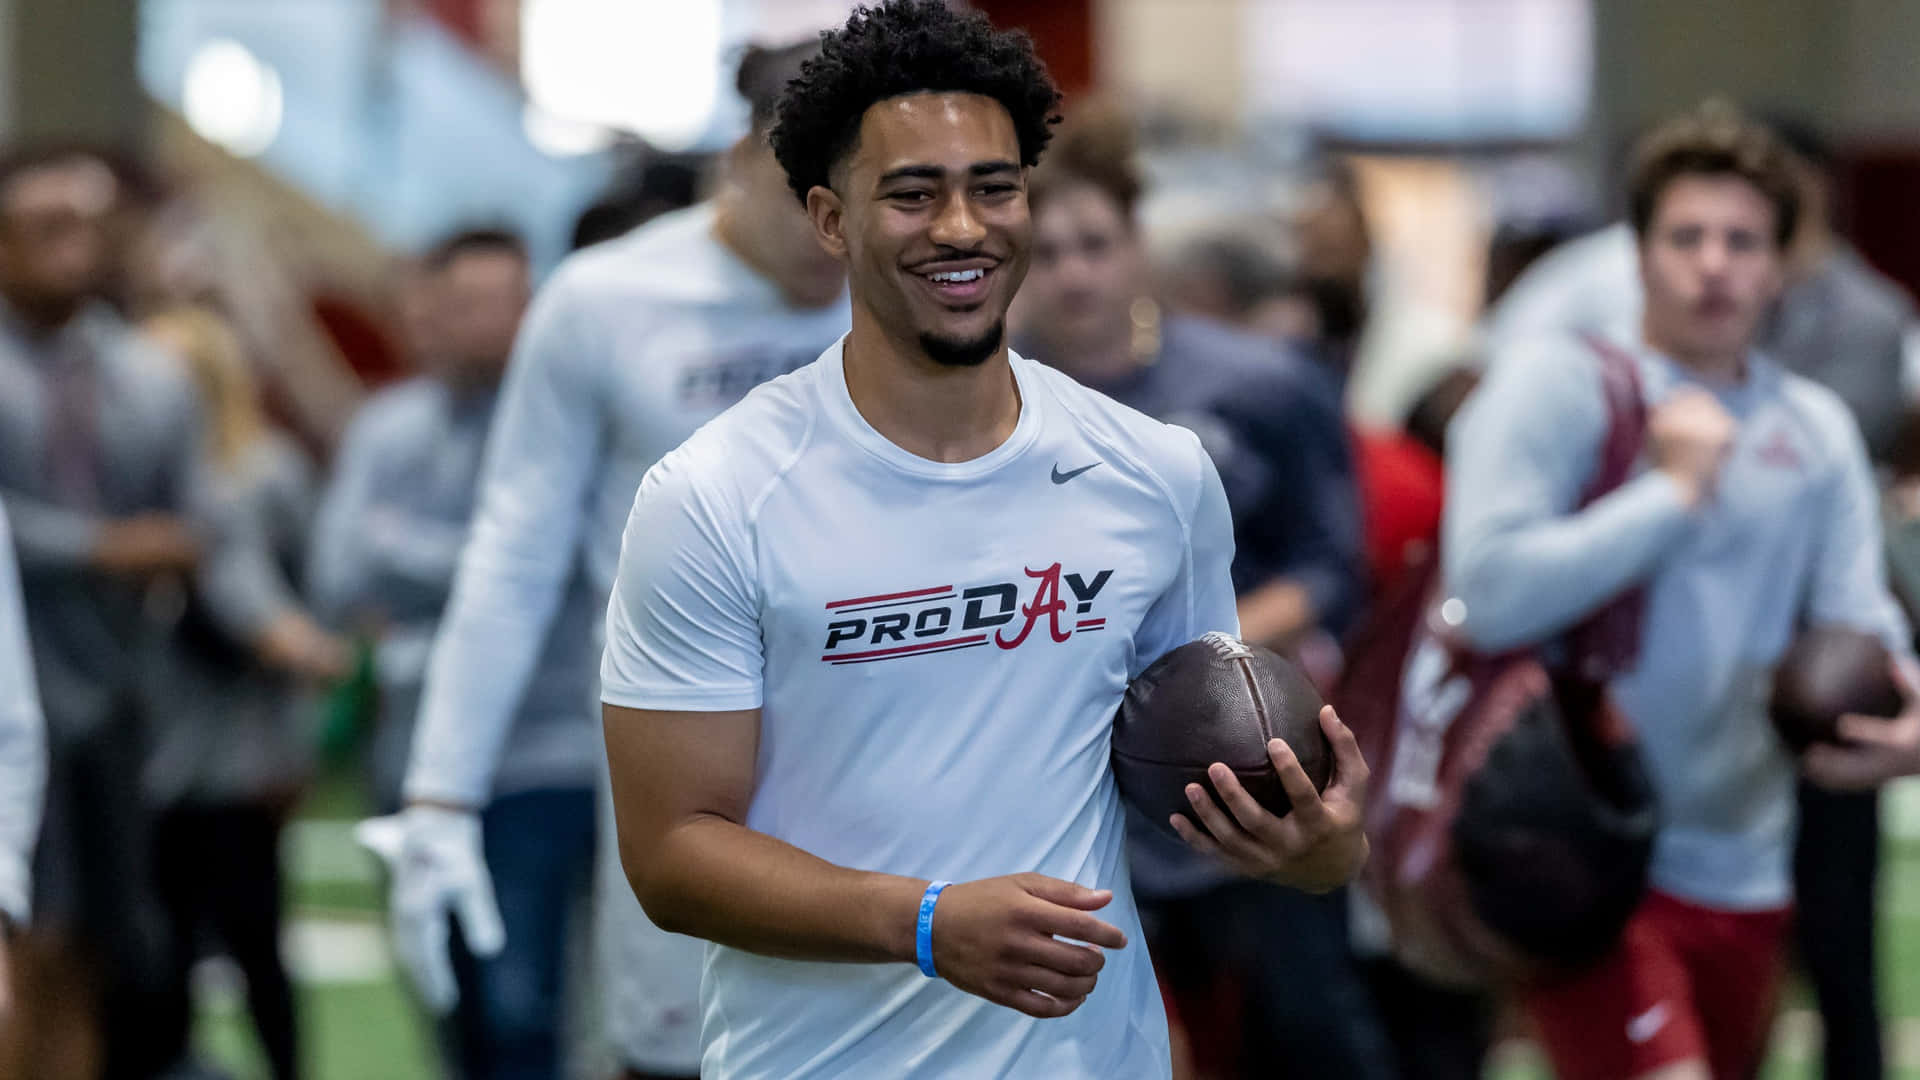 Bryce Young Smiling During Pro Day Event Wallpaper